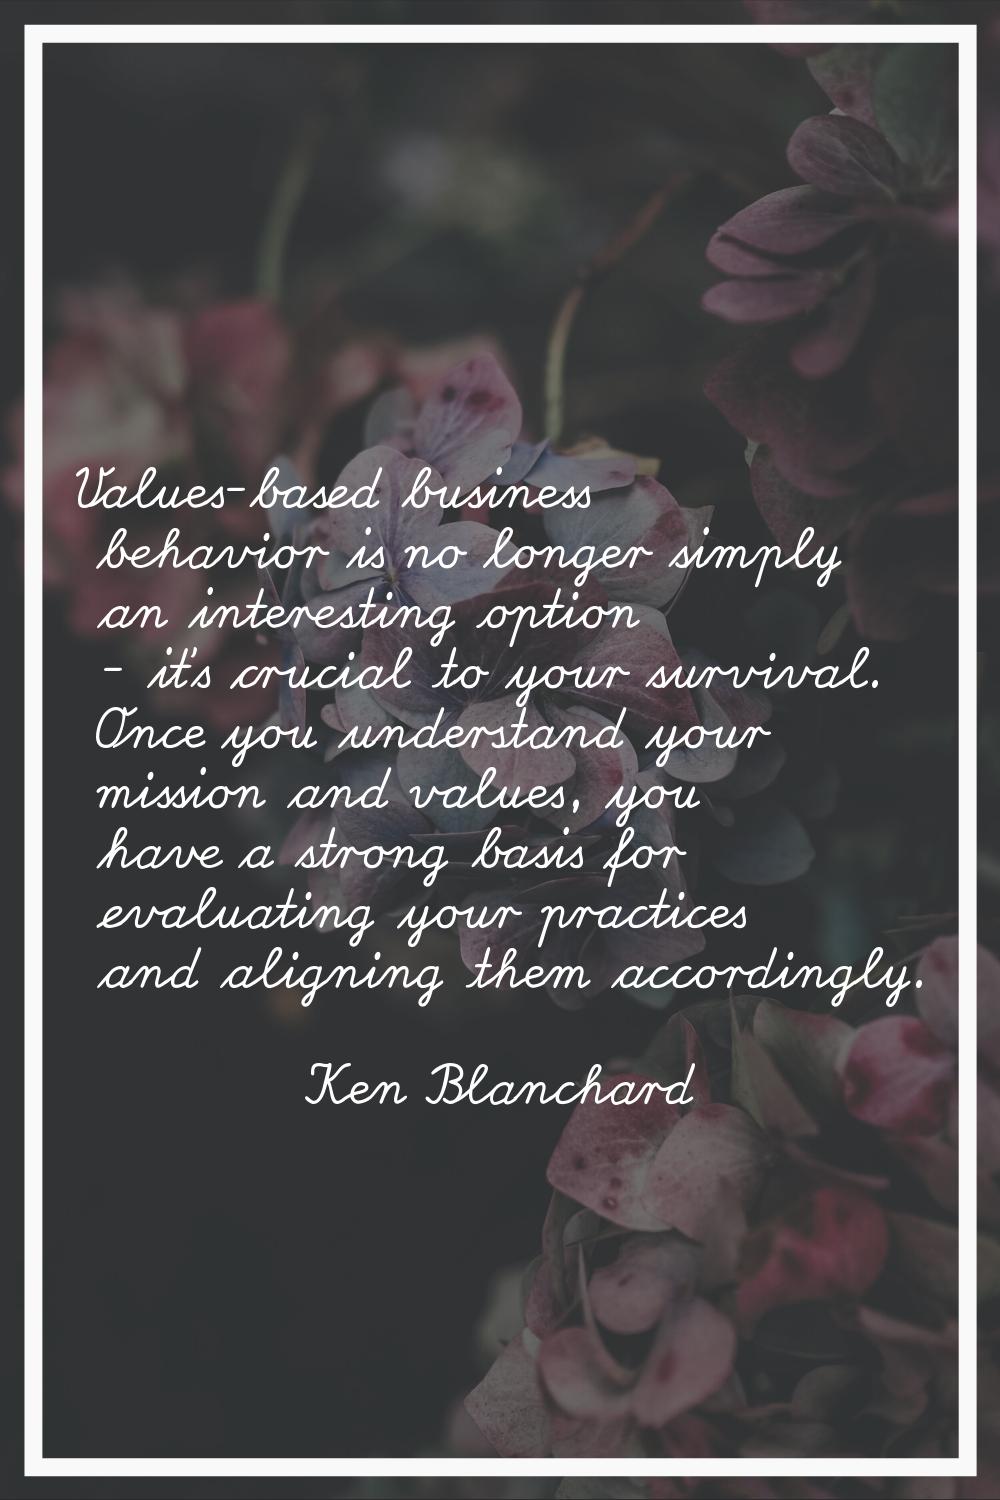 Values-based business behavior is no longer simply an interesting option - it's crucial to your sur